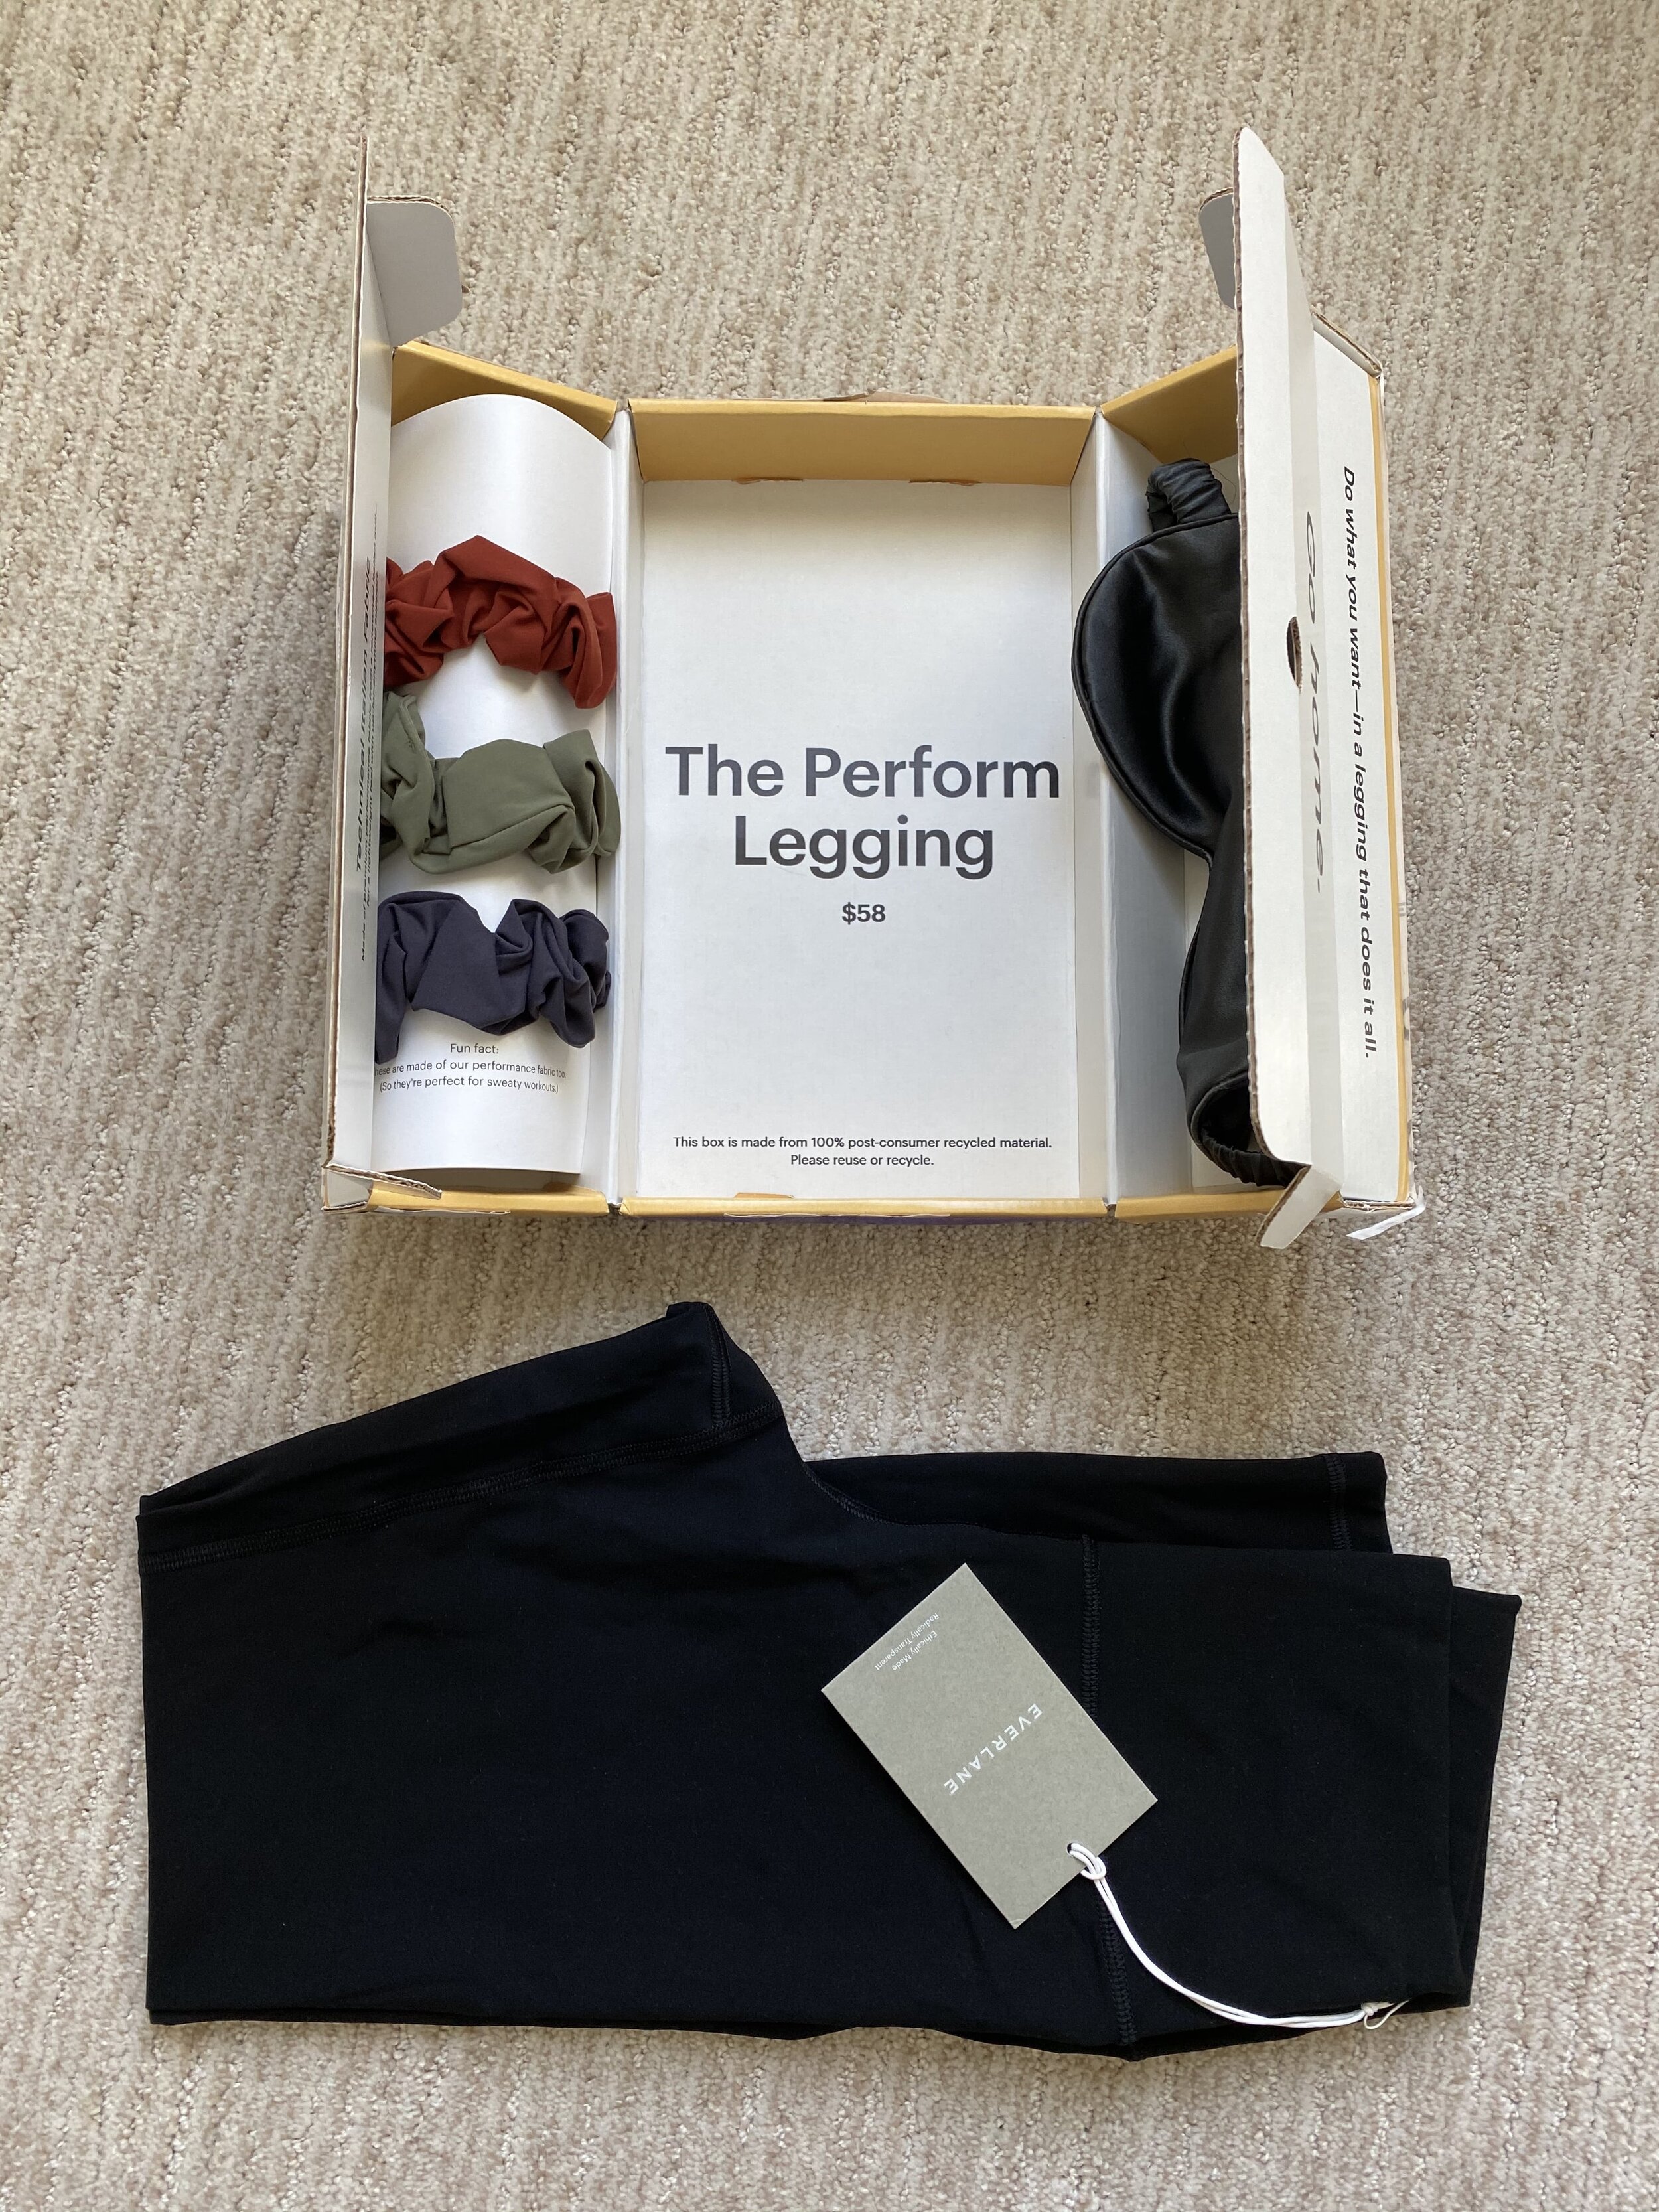 Everlane Perform Legging Review (one c/o, others not) and Giveaway